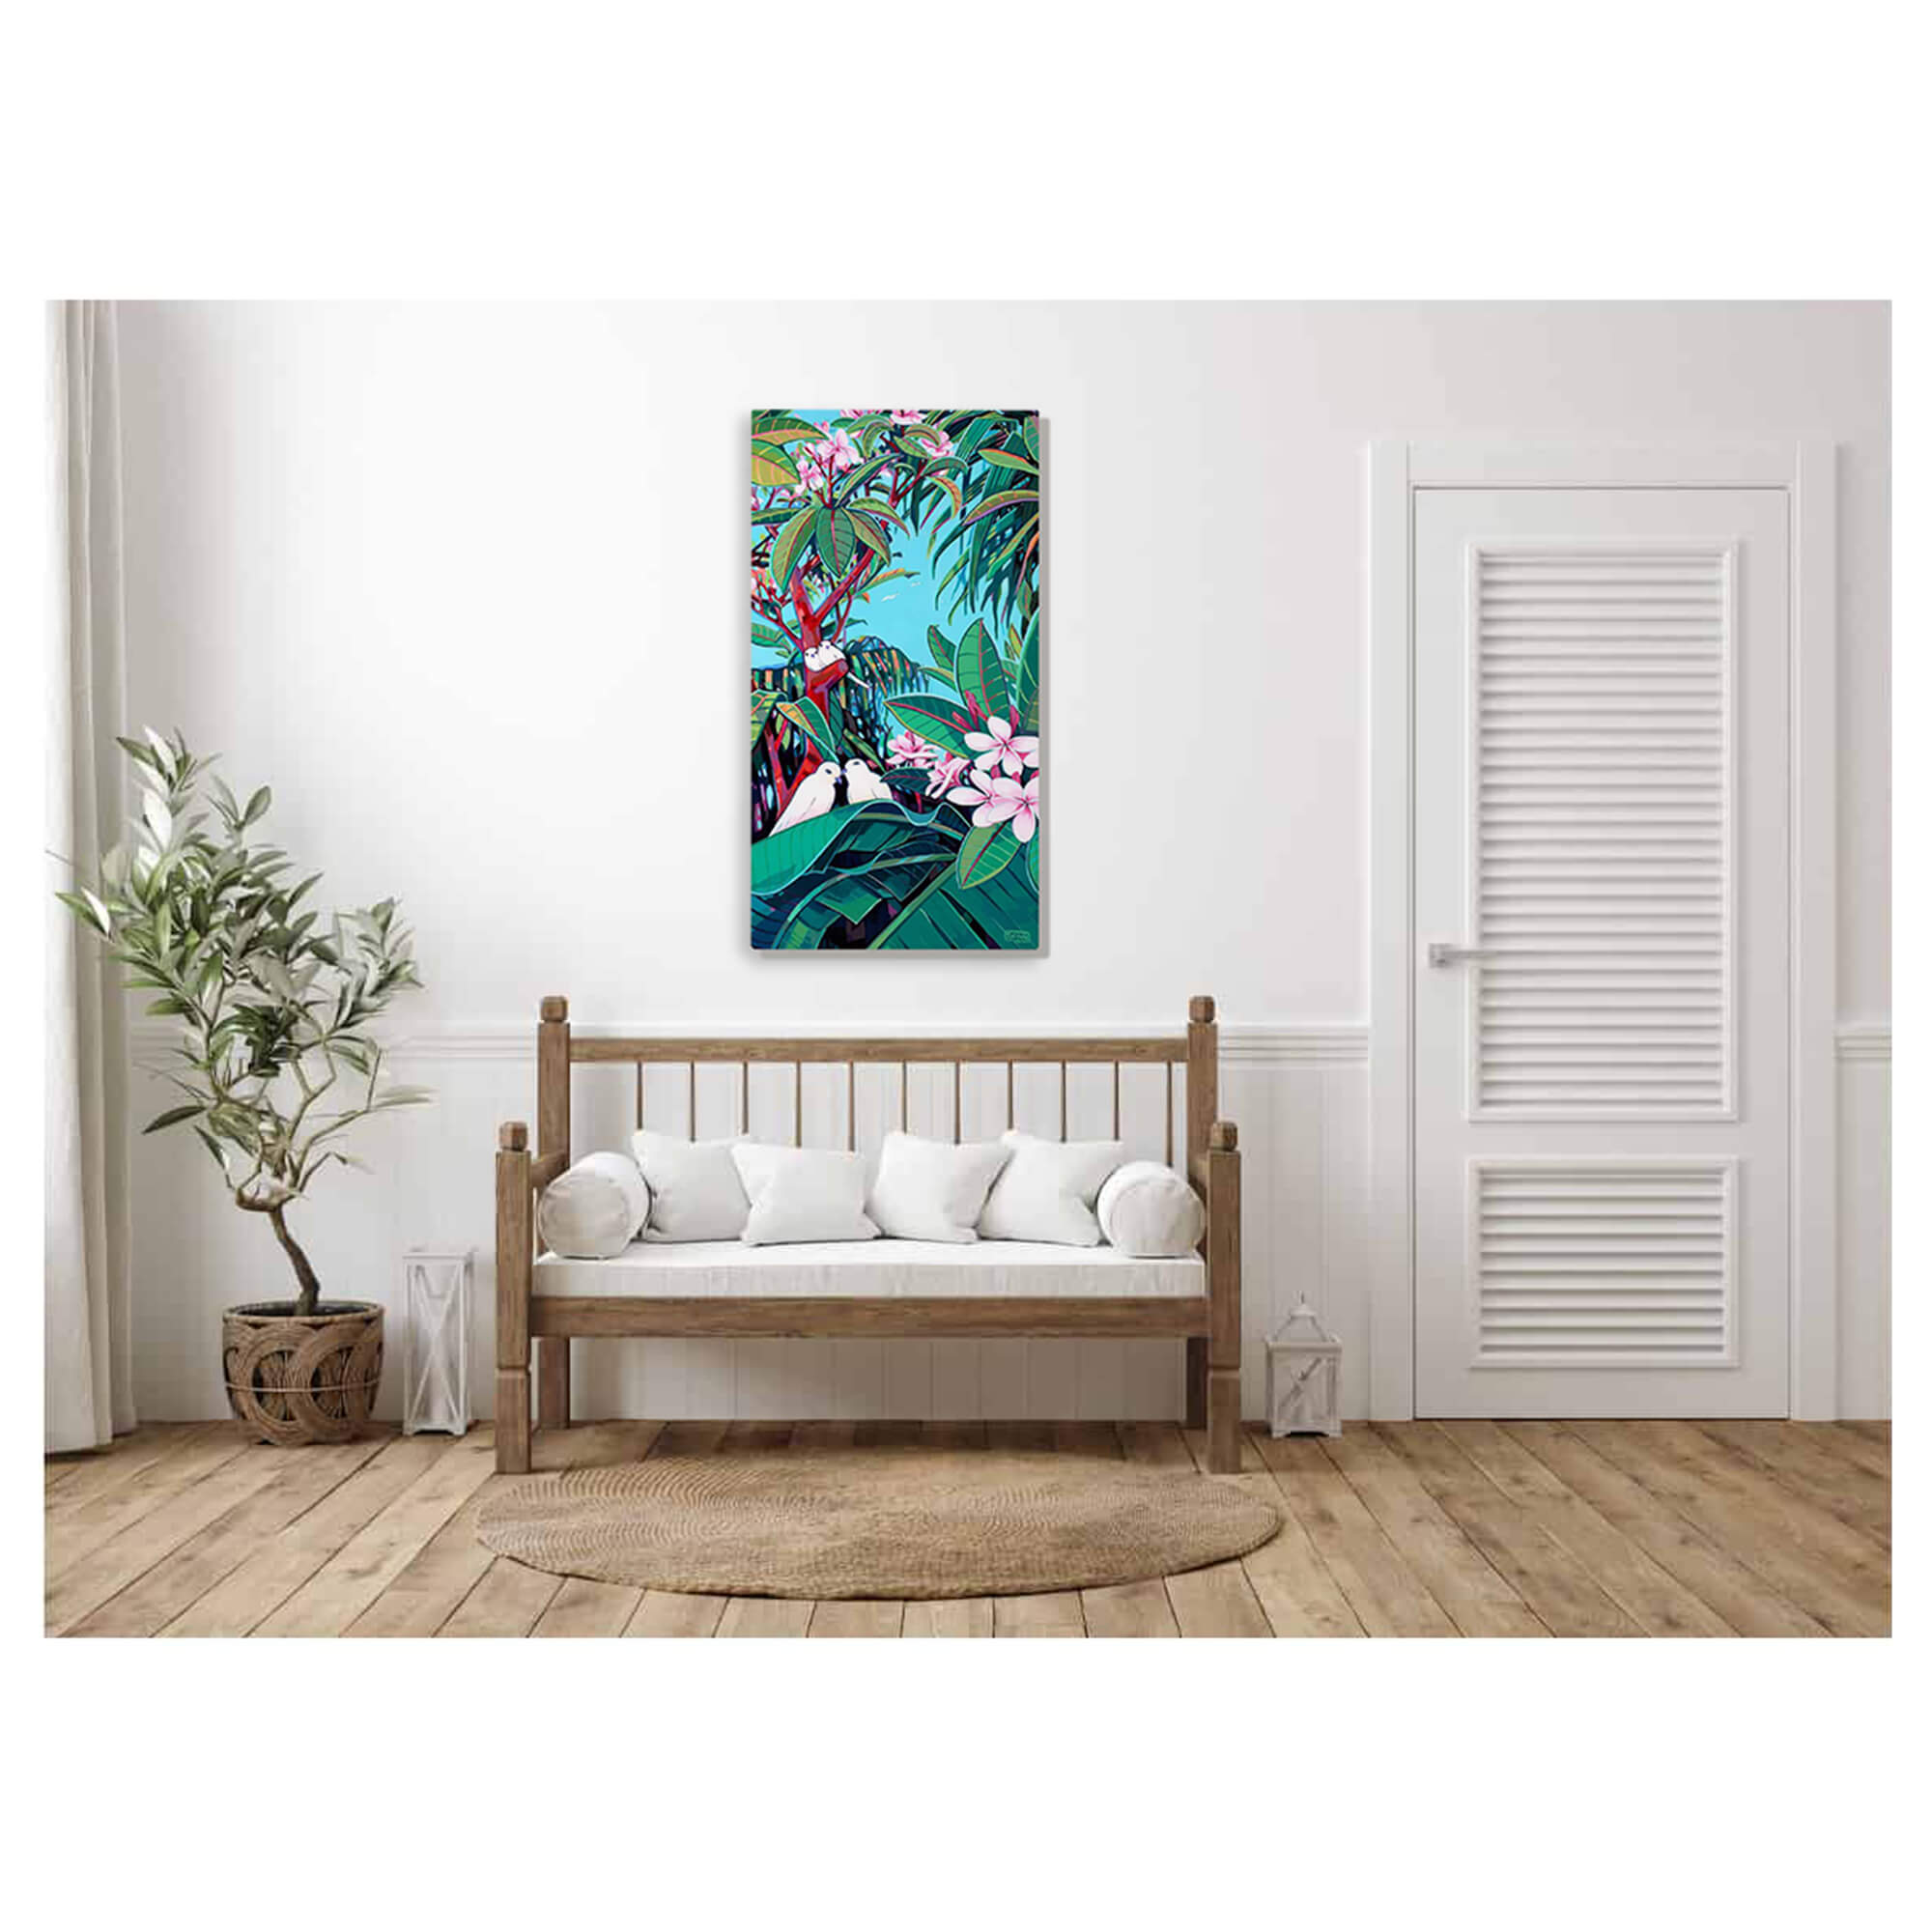 Metal print of white birds perched in pairs amongst tropical foliage by Hawaii artist Christie Shinn